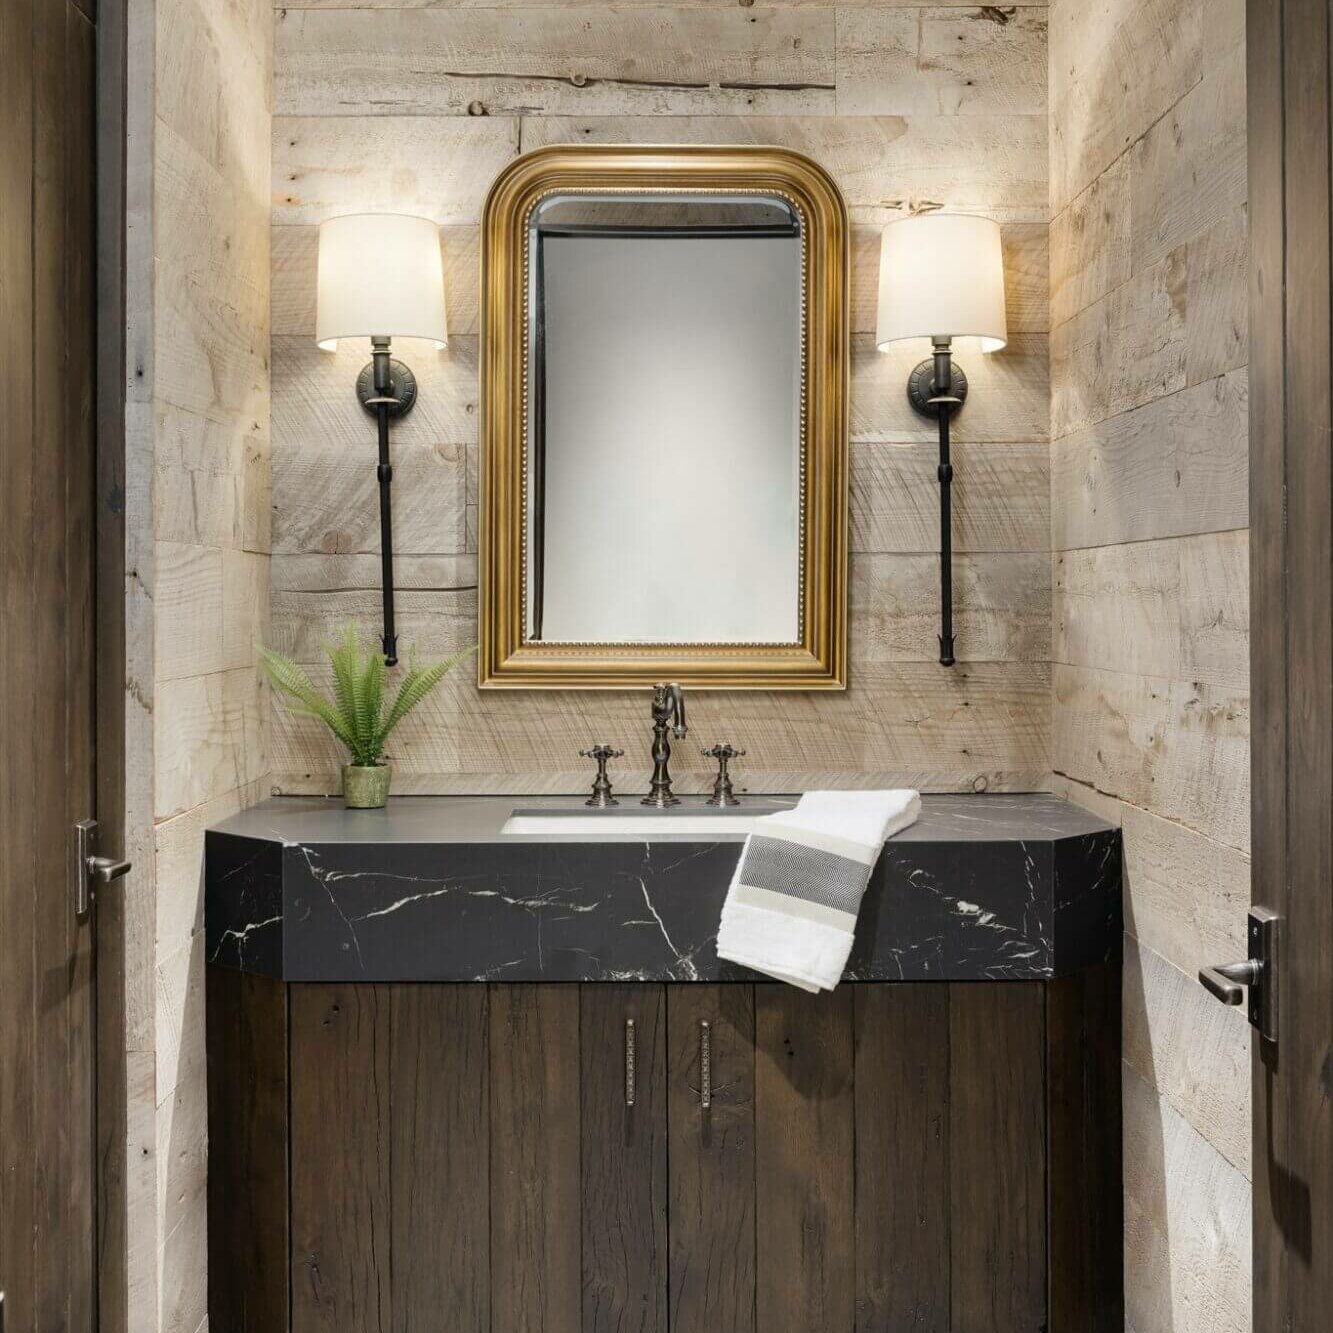 A bathroom with marble counter tops and a large mirror.